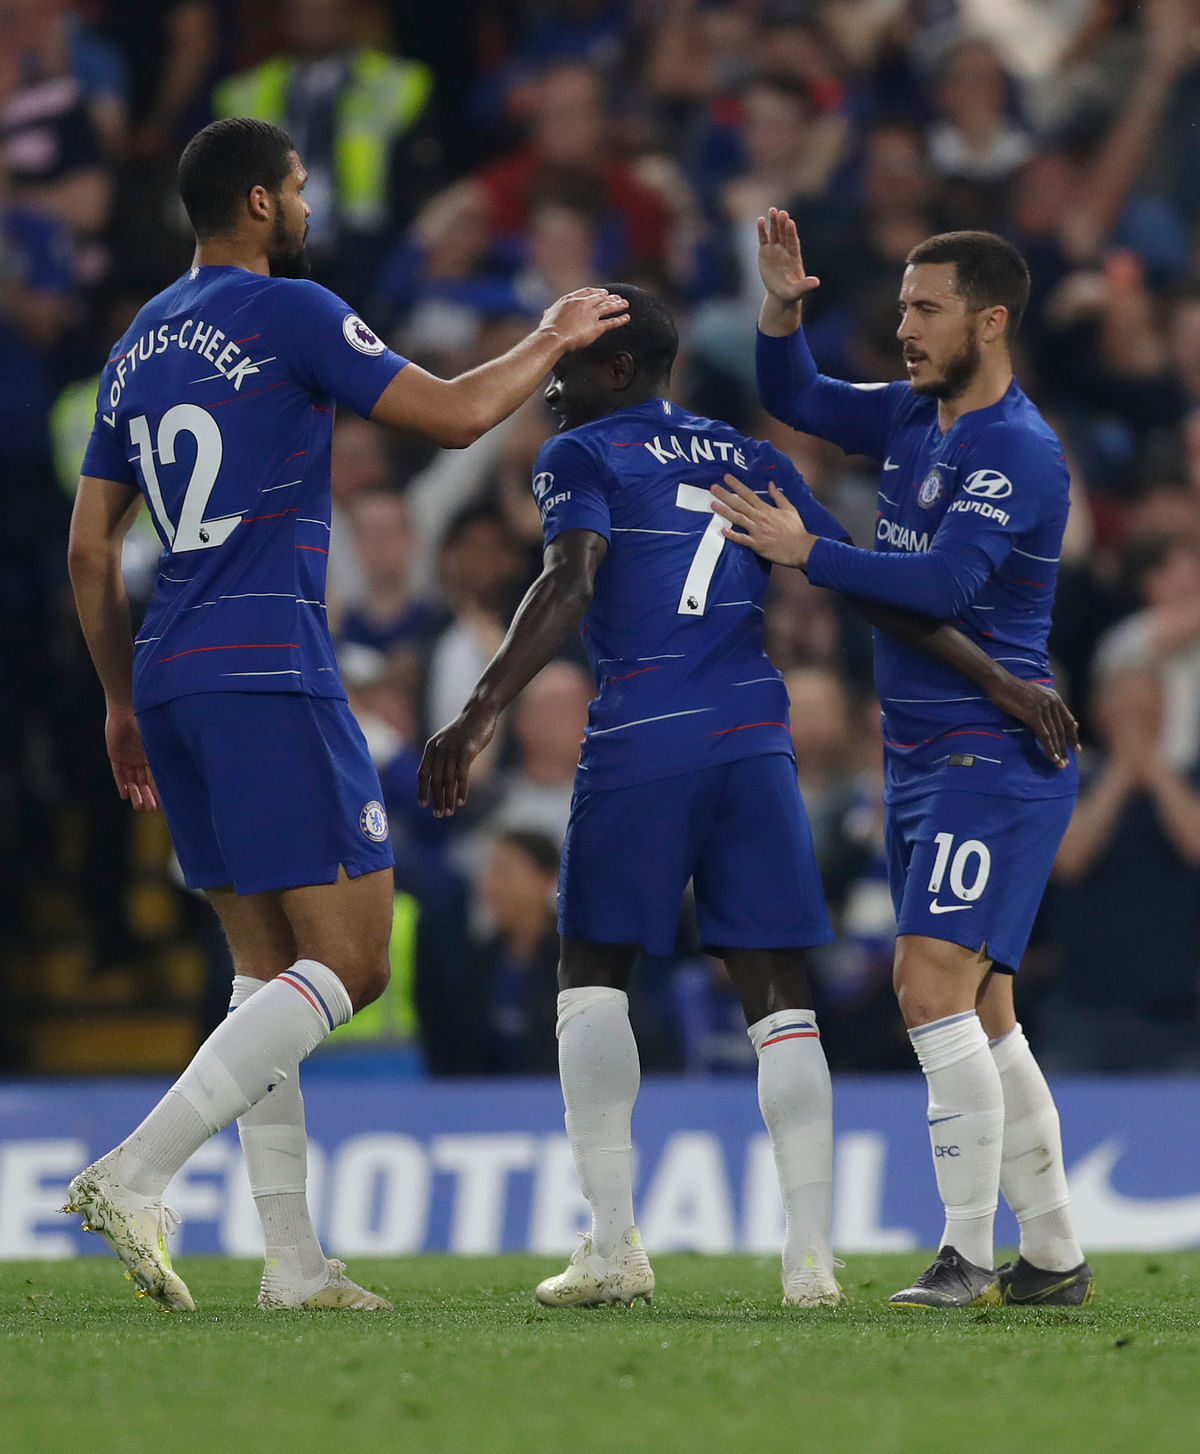 Kante and Gonzalo Higuain put Chelsea on top at Stamford Bridge after Jeff Hendrick had given Burnley an early lead.